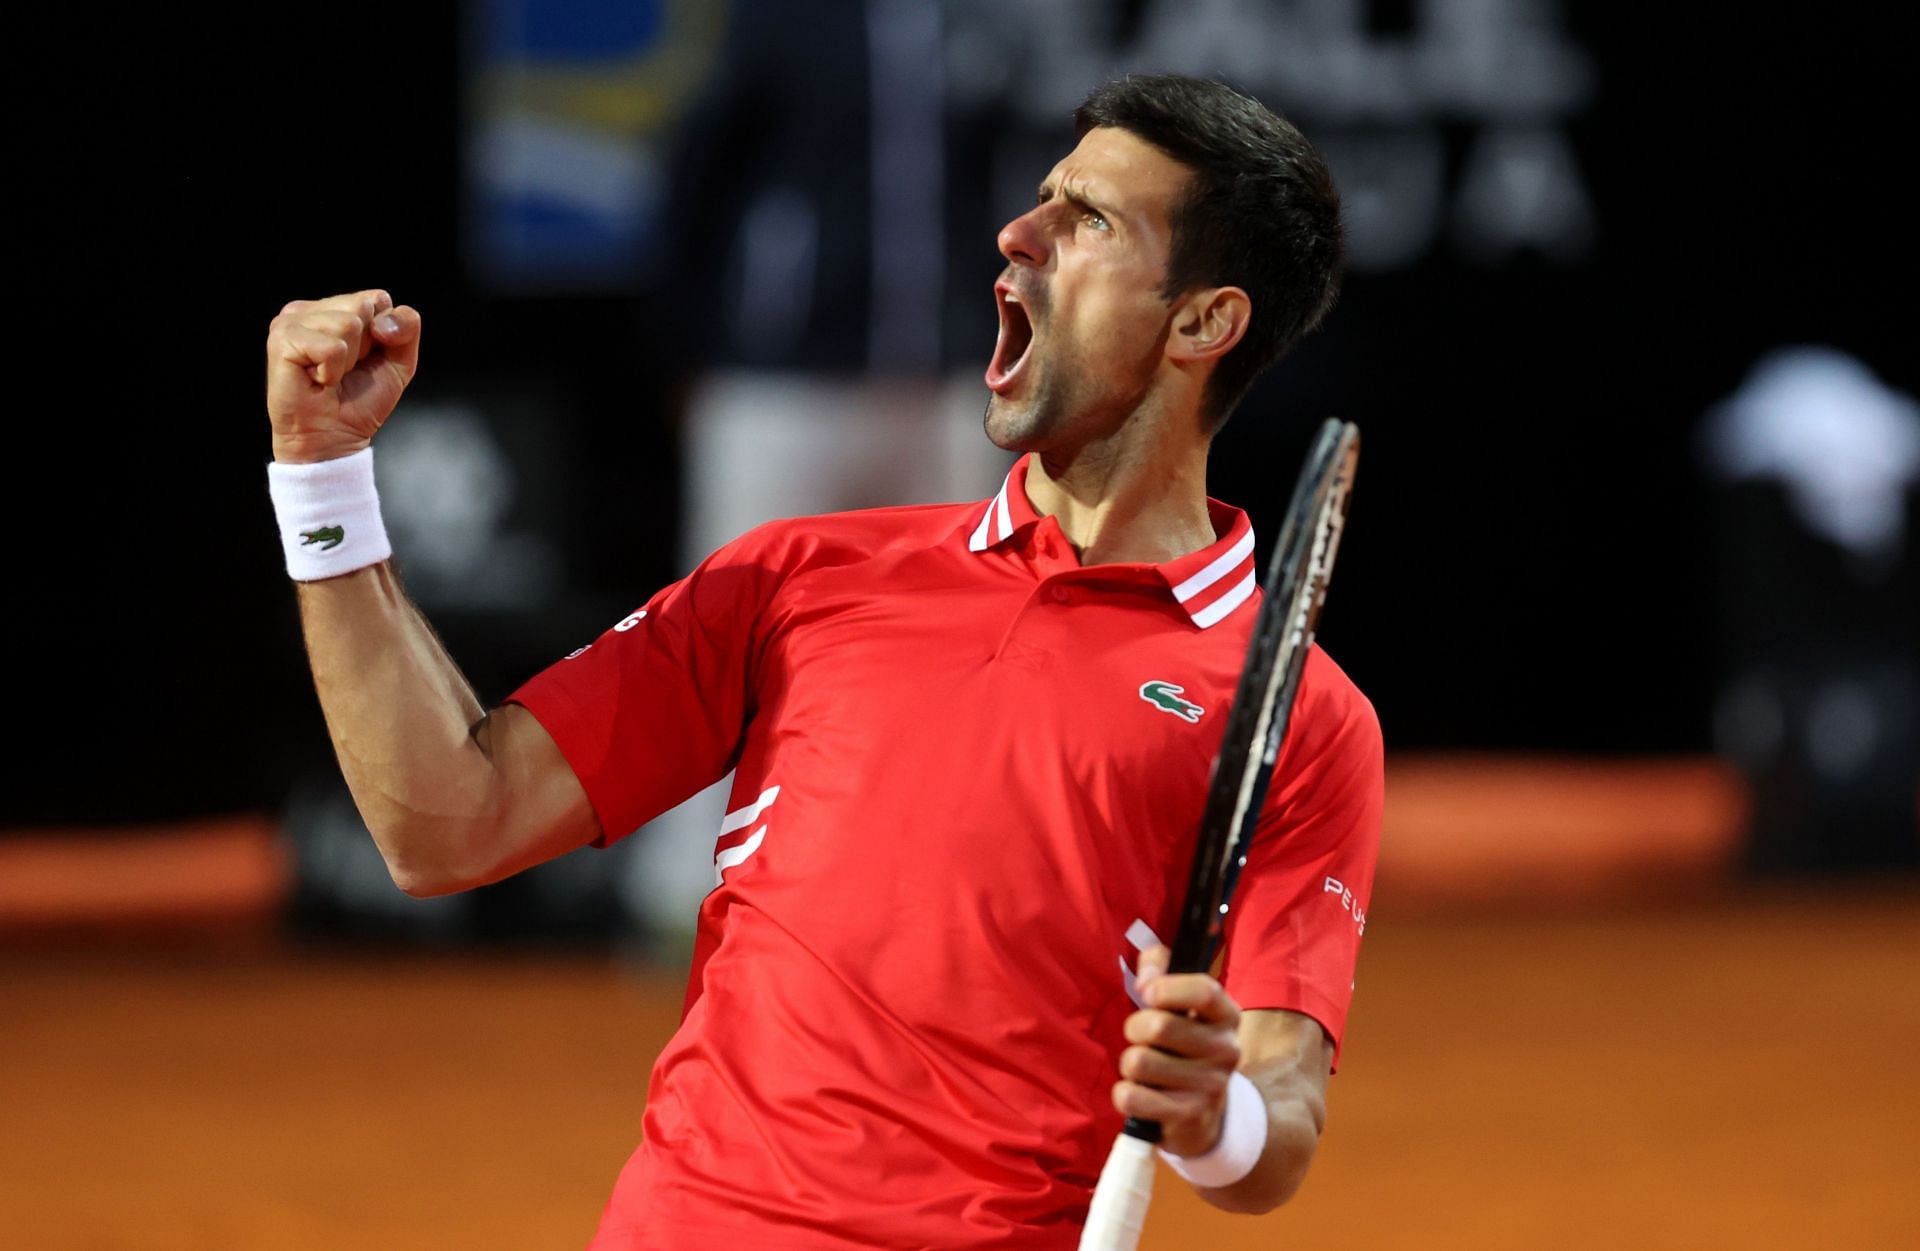 Novak Djokovic has to defend 600 points in Rome from reaching the final last year